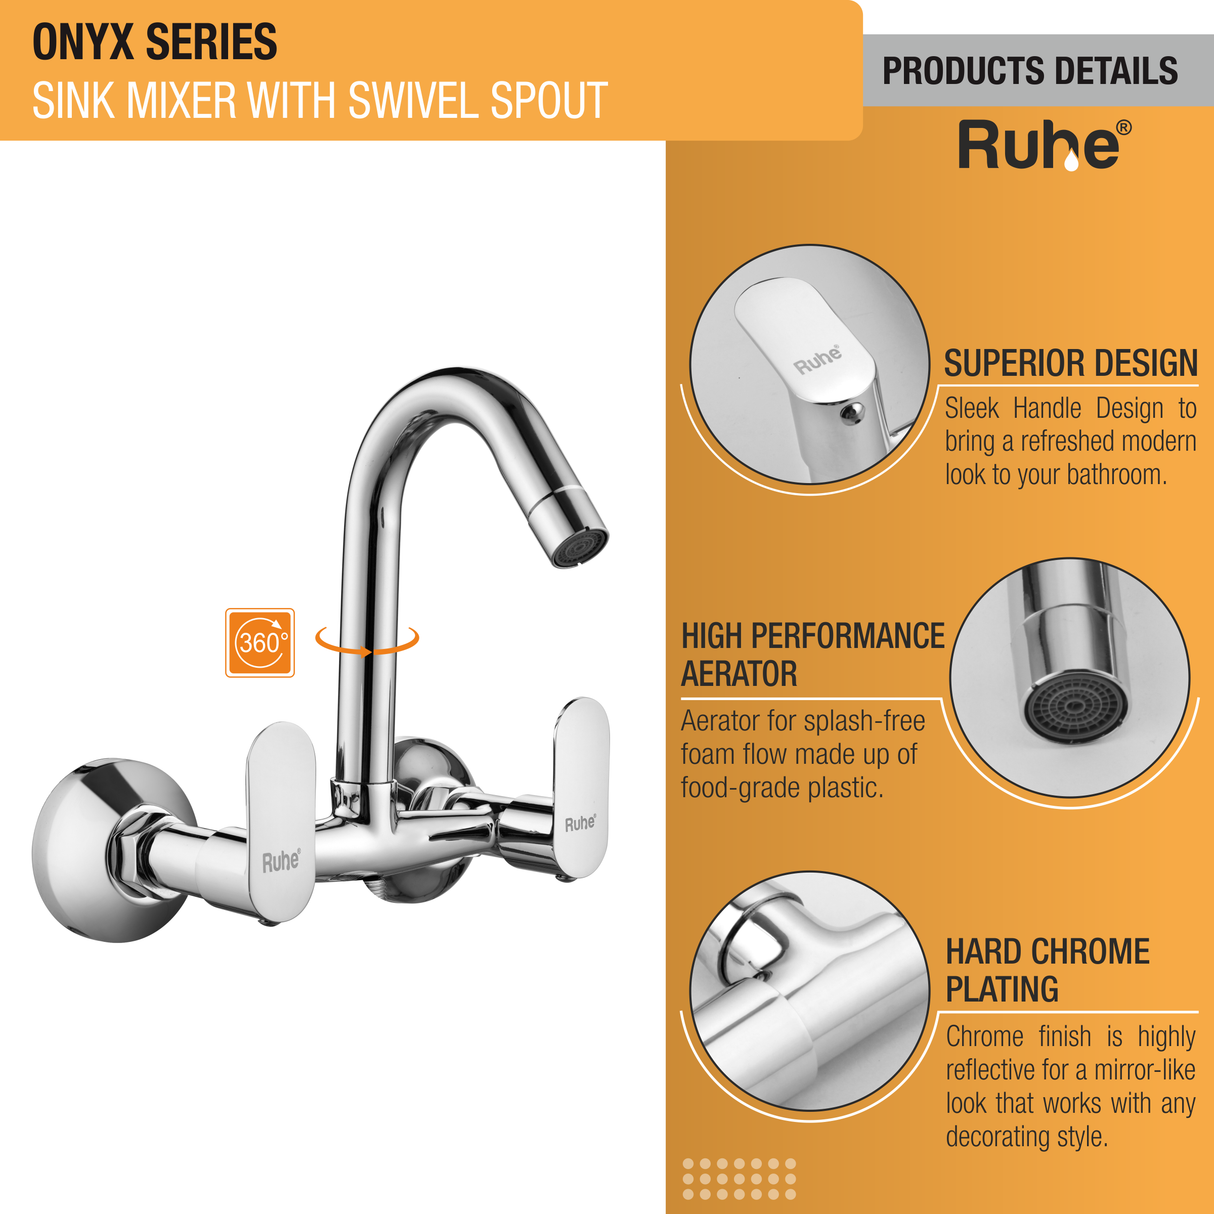 Onyx Sink Mixer with Small (7 inches) Round Swivel Spout Faucet product details